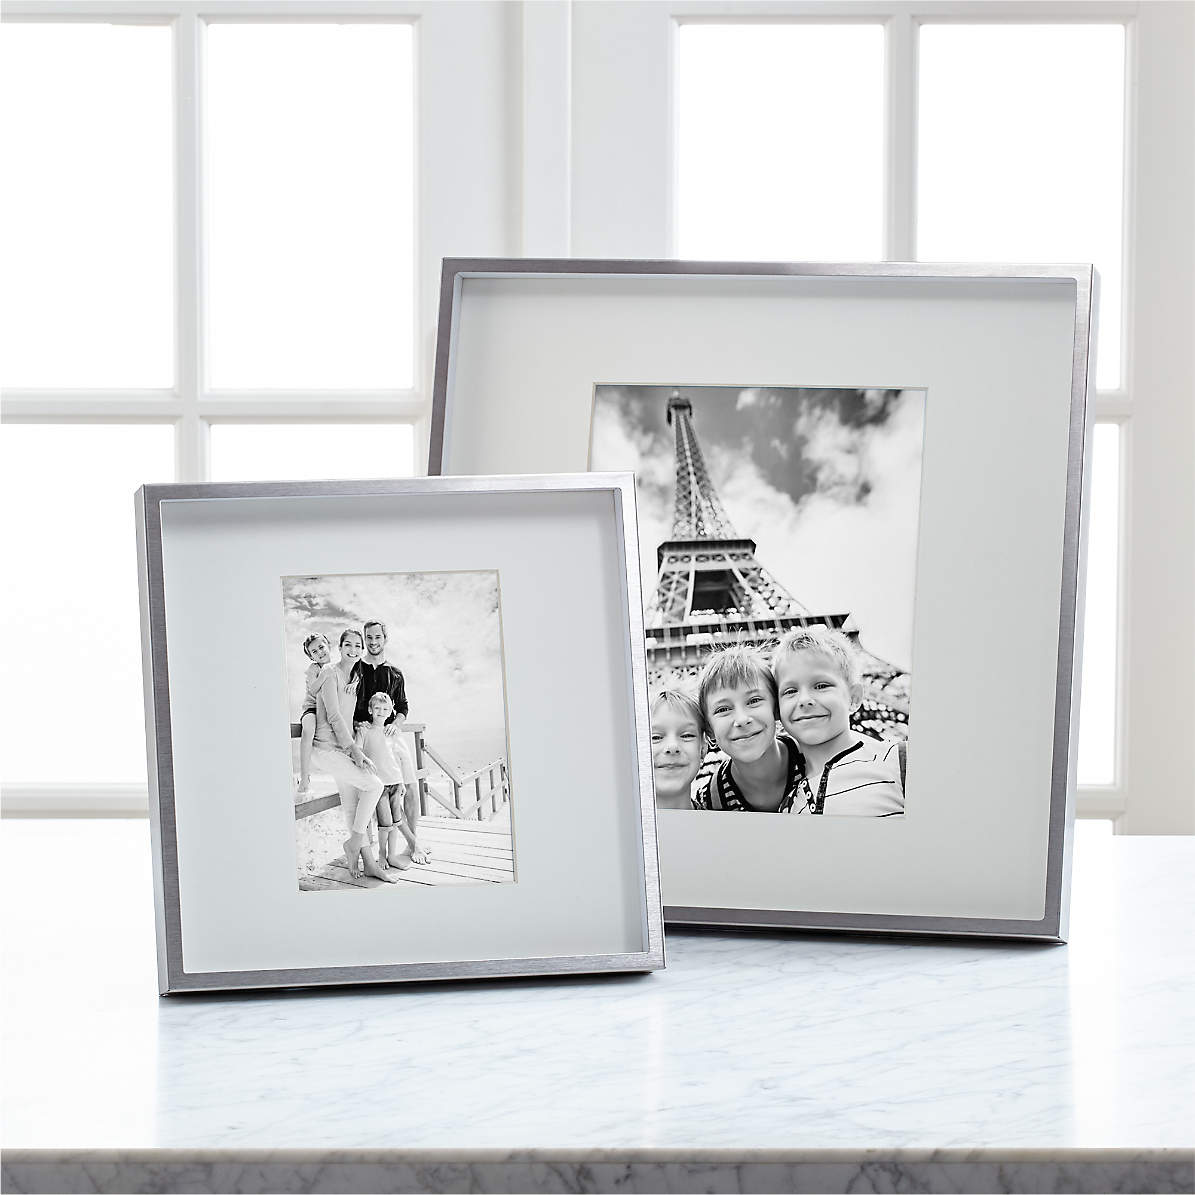 Details about   Seek and You Will Find Brushed Silver Rope Trim 8x10 Table Top Photo Frame 